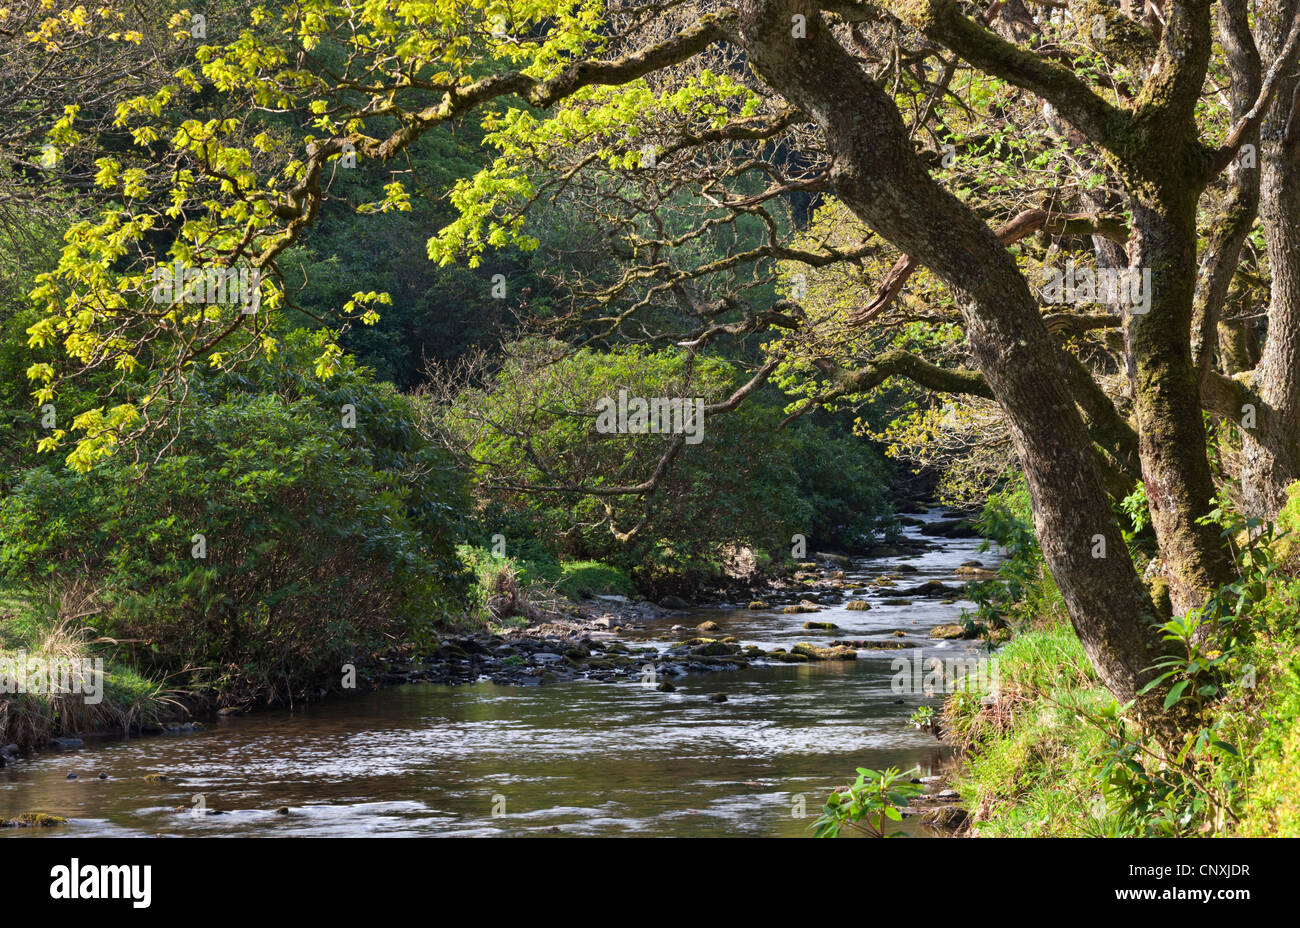 Spring foliage on the banks of Badgworthy Water in the Doone Valley, Exmoor, Somerset, England. Spring (May) 2011. Stock Photo